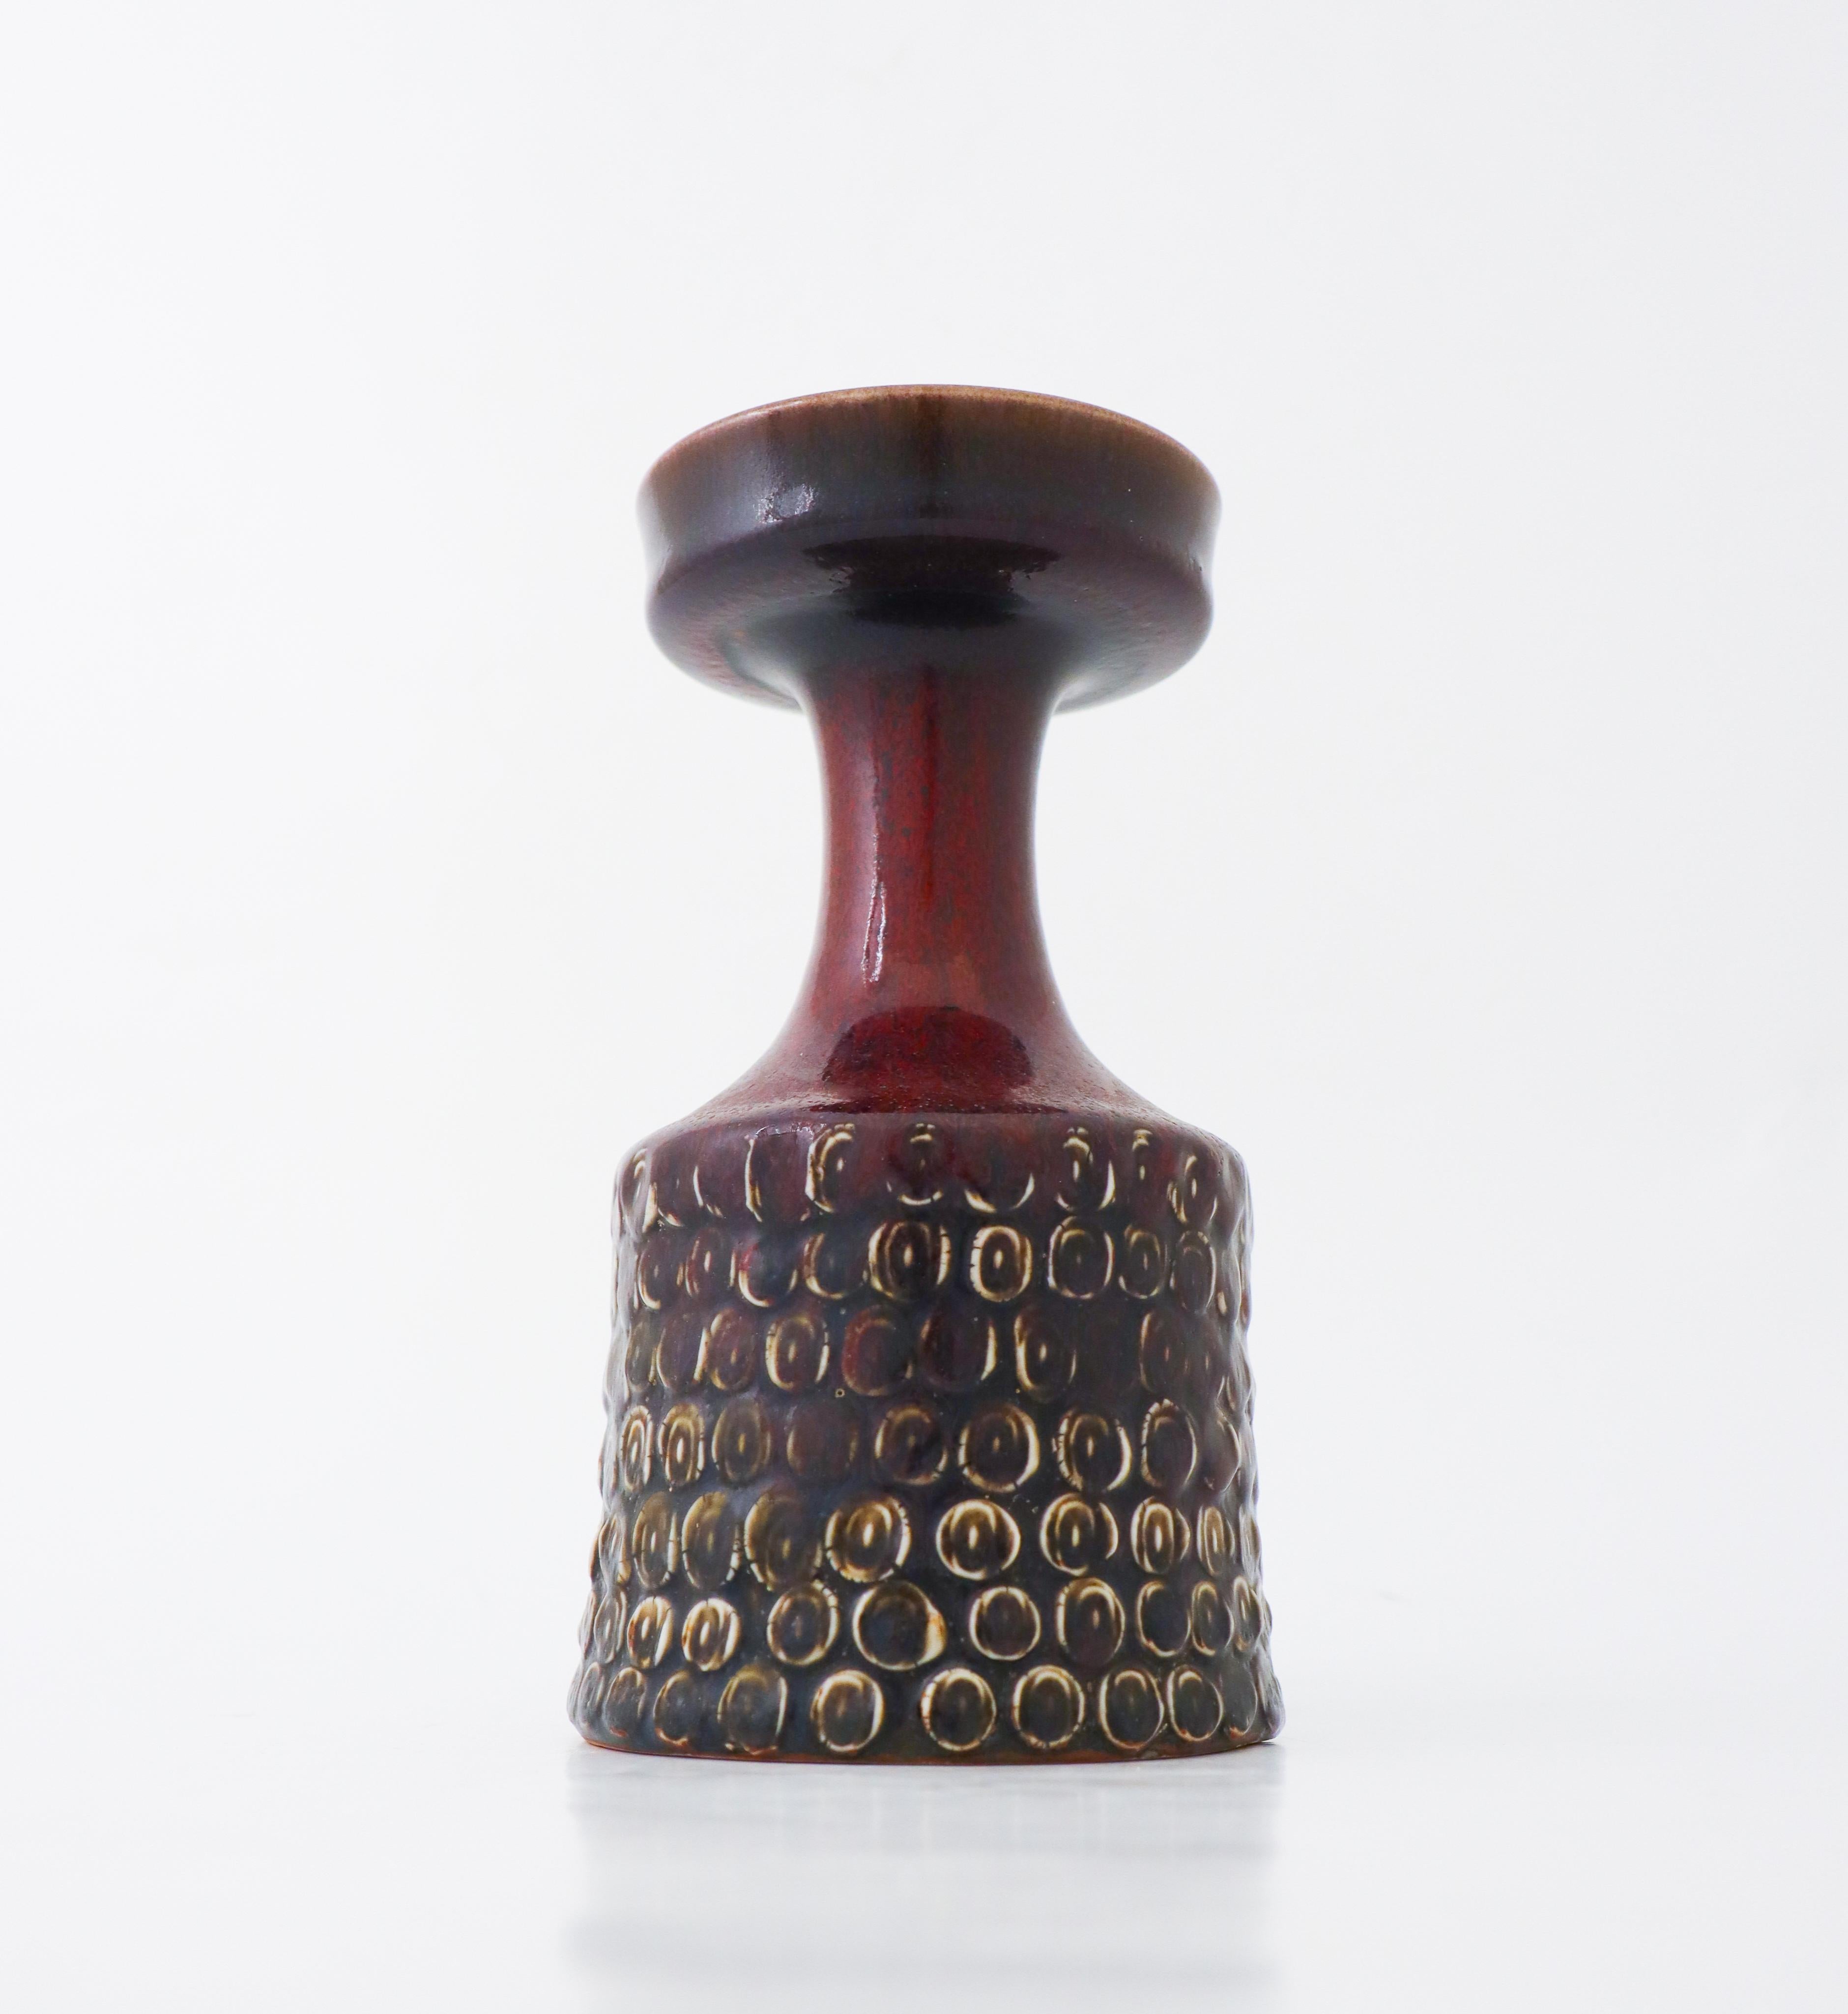 A vase designed by Stig Lindberg at Gustavsbergs Studio in Stockholm. It has an oxblood red shiny color and is in excellent condition and marked with the classical Studio hand and Stig below

Stig Lindberg is one of the most well known designers in